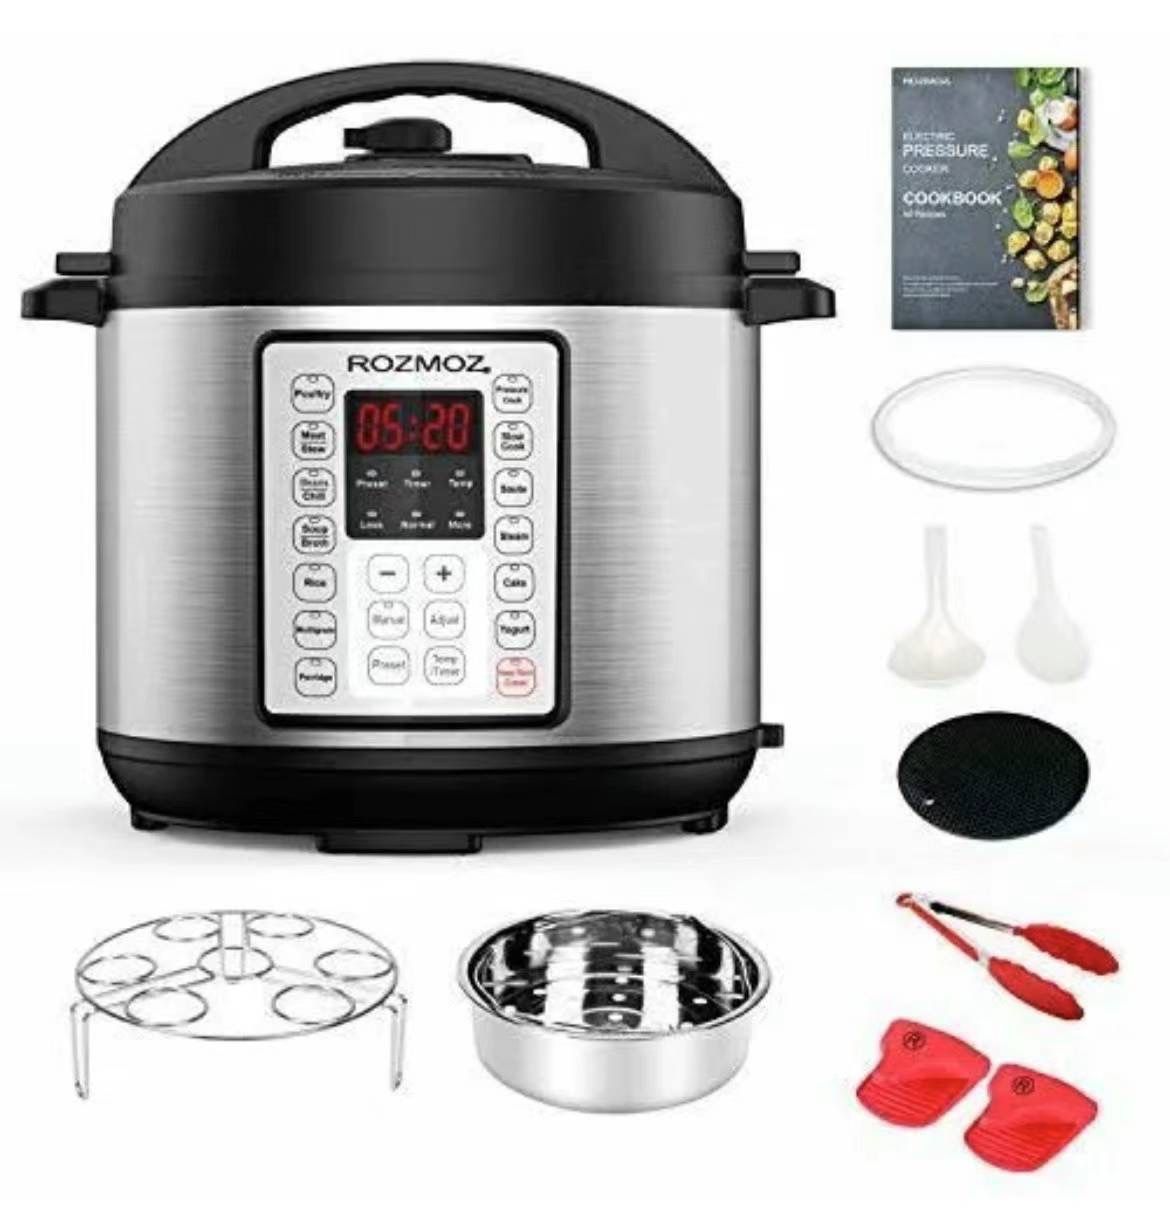 9-in-1 Electric Pressure Cooker, Slow Cooker, Rice Cooker, Steamer, Sauté, Yogurt Maker, Warmer & Sterilizer, Includes App With Over 800 Recipes, Stai